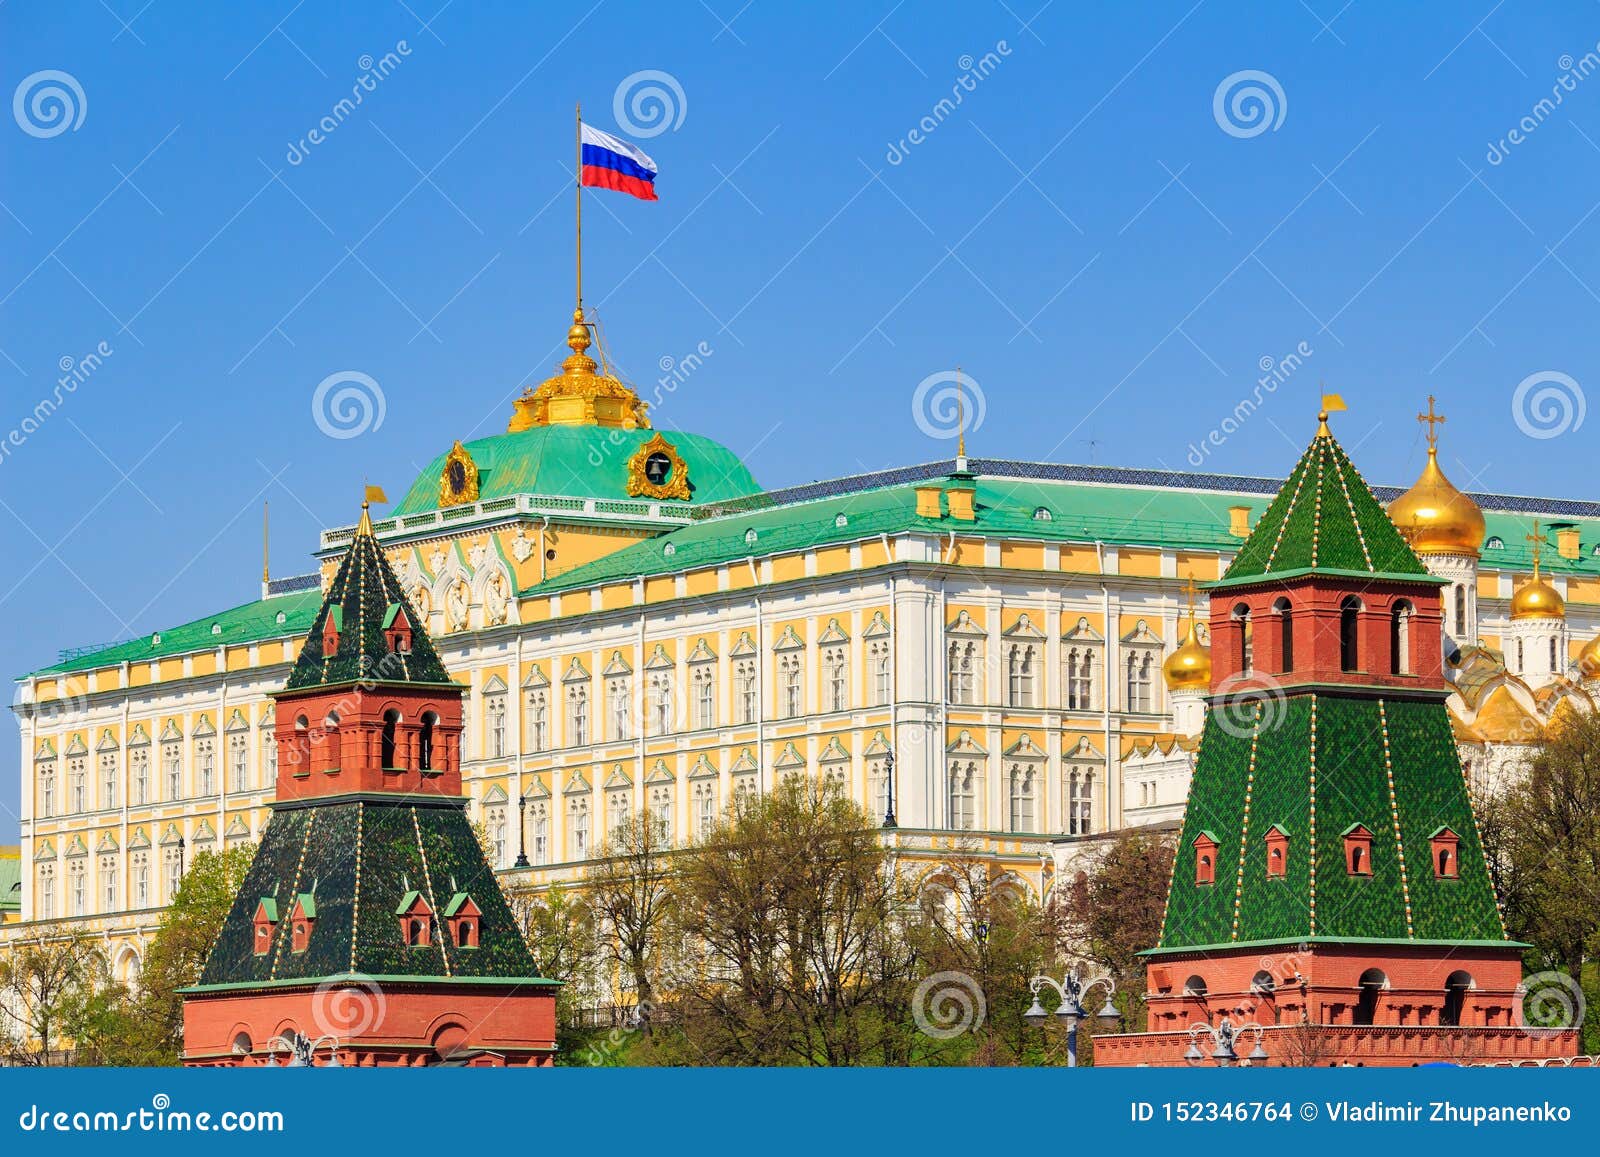 moscow, russia - may 01, 2019: building of grand kremlin palace with waving flag of russian federation on the roof against moscow